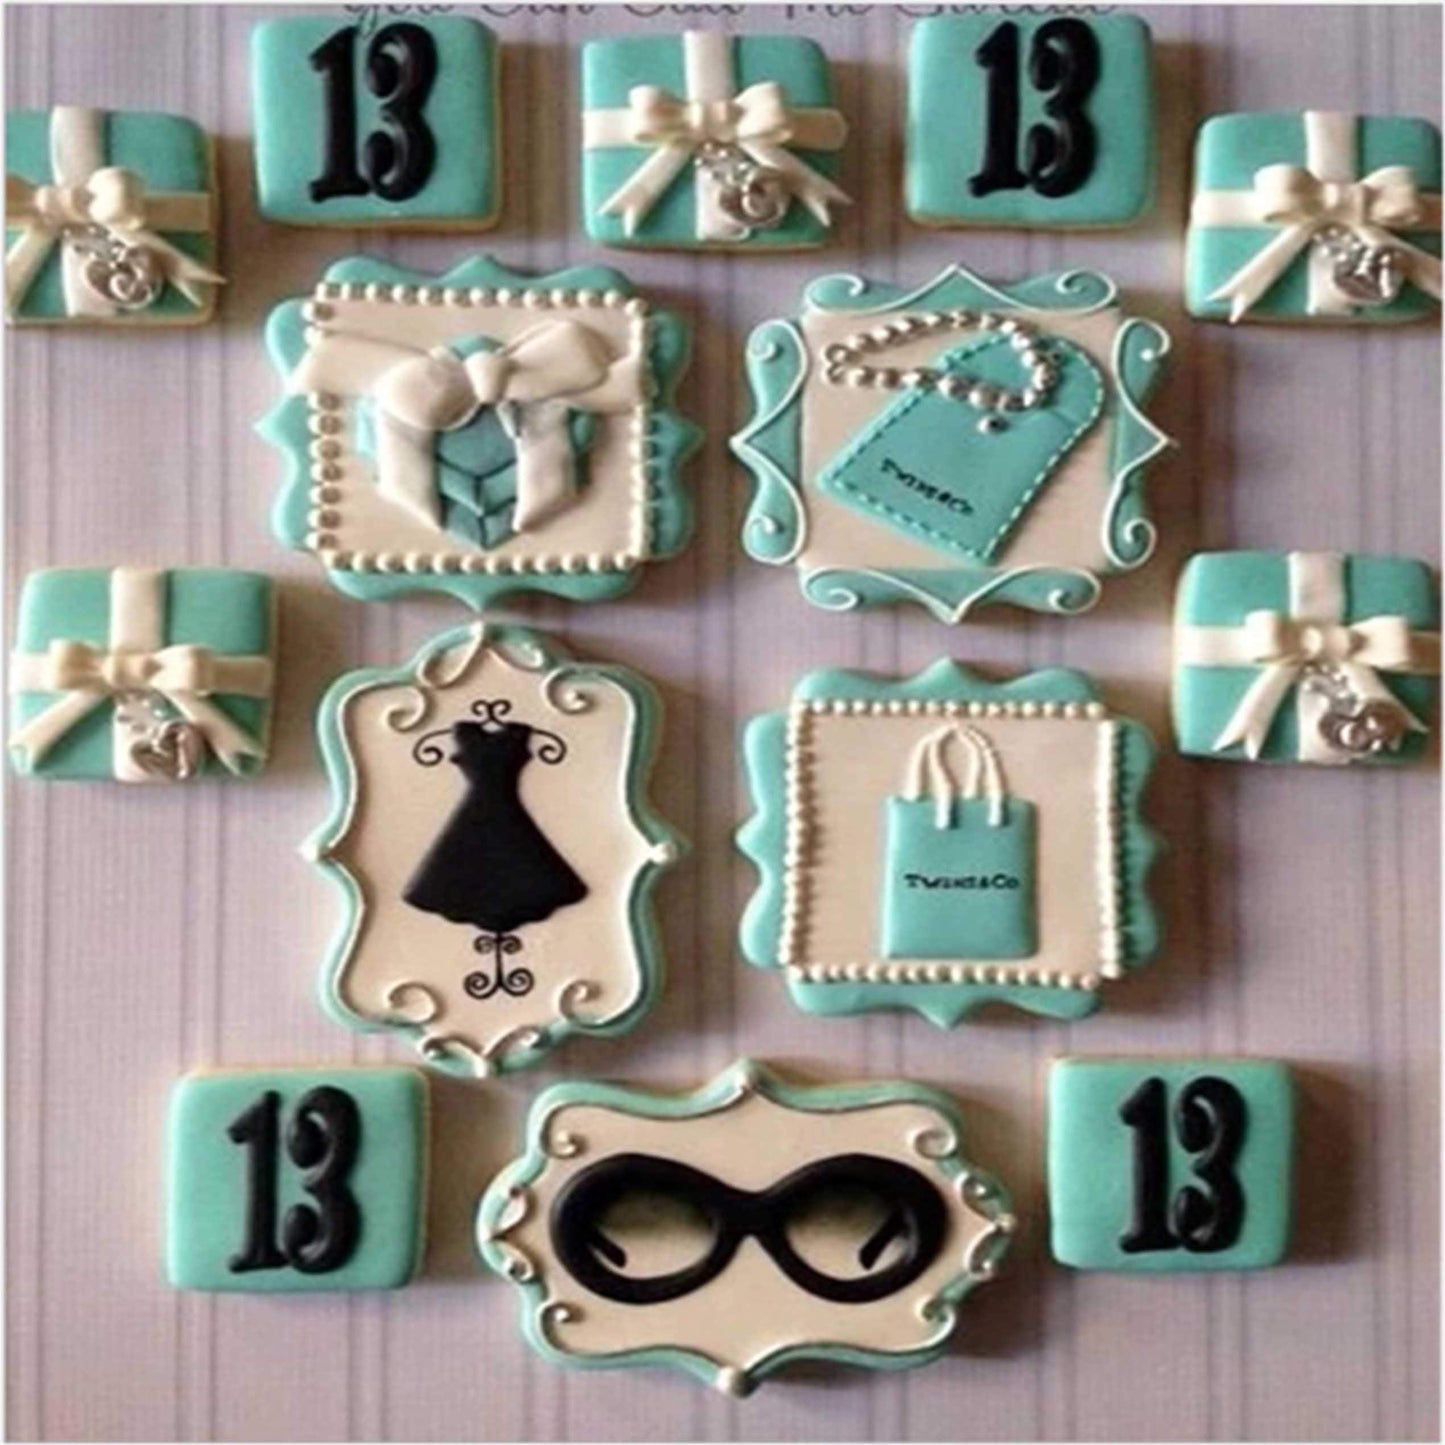 10 PCS Plaque Frame Cookie Cutters Set Different Frames Fondant Cutter Molds for Making Mousse Cake Cookies Biscuit, Fruit, Bread Wedding and Birthday Party Decorations - CookCave